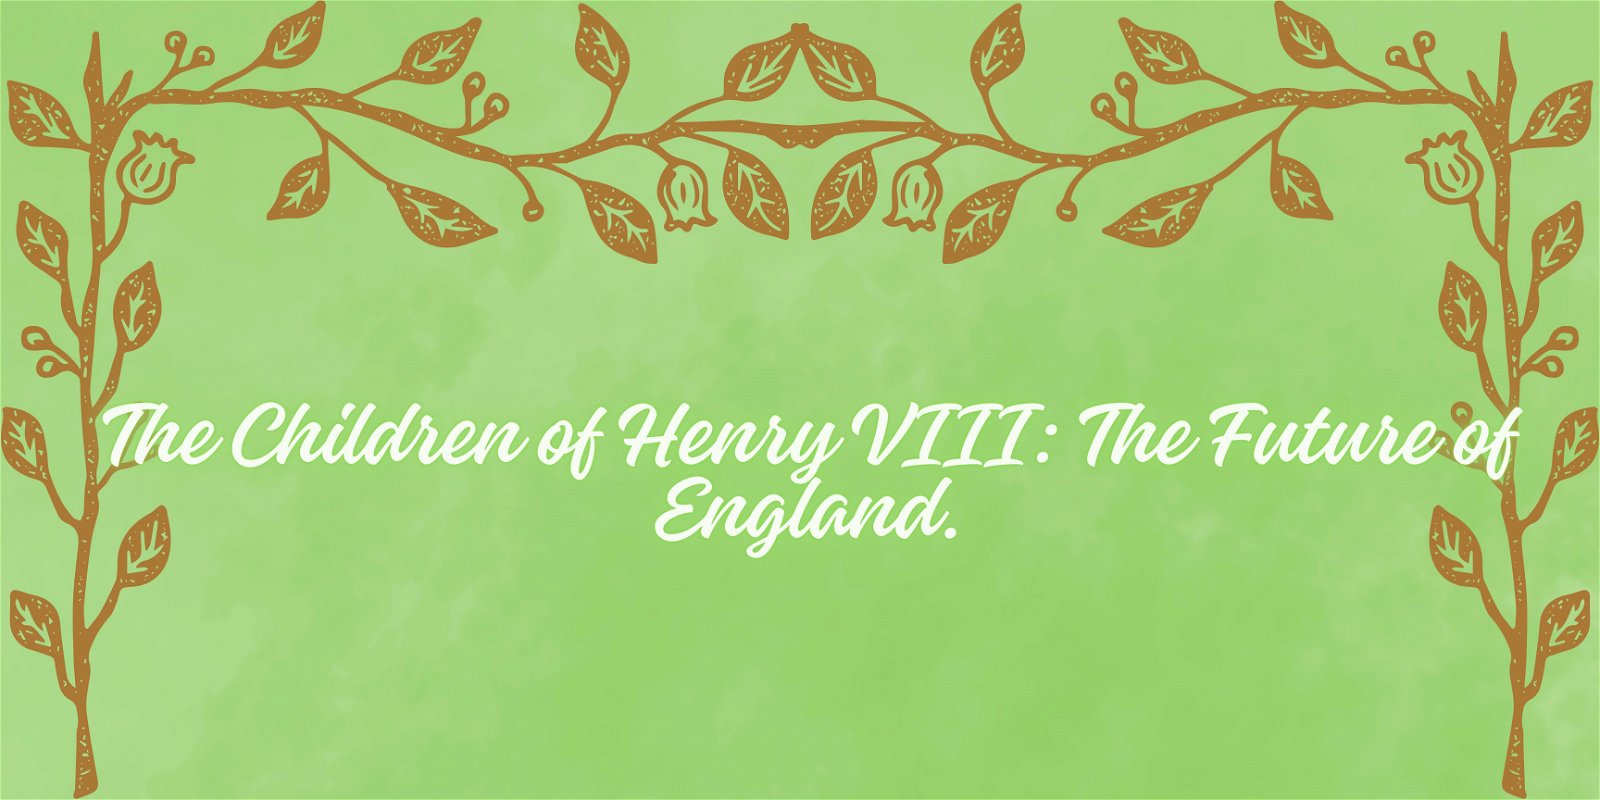 The Children of Henry VIII: The Future of England.